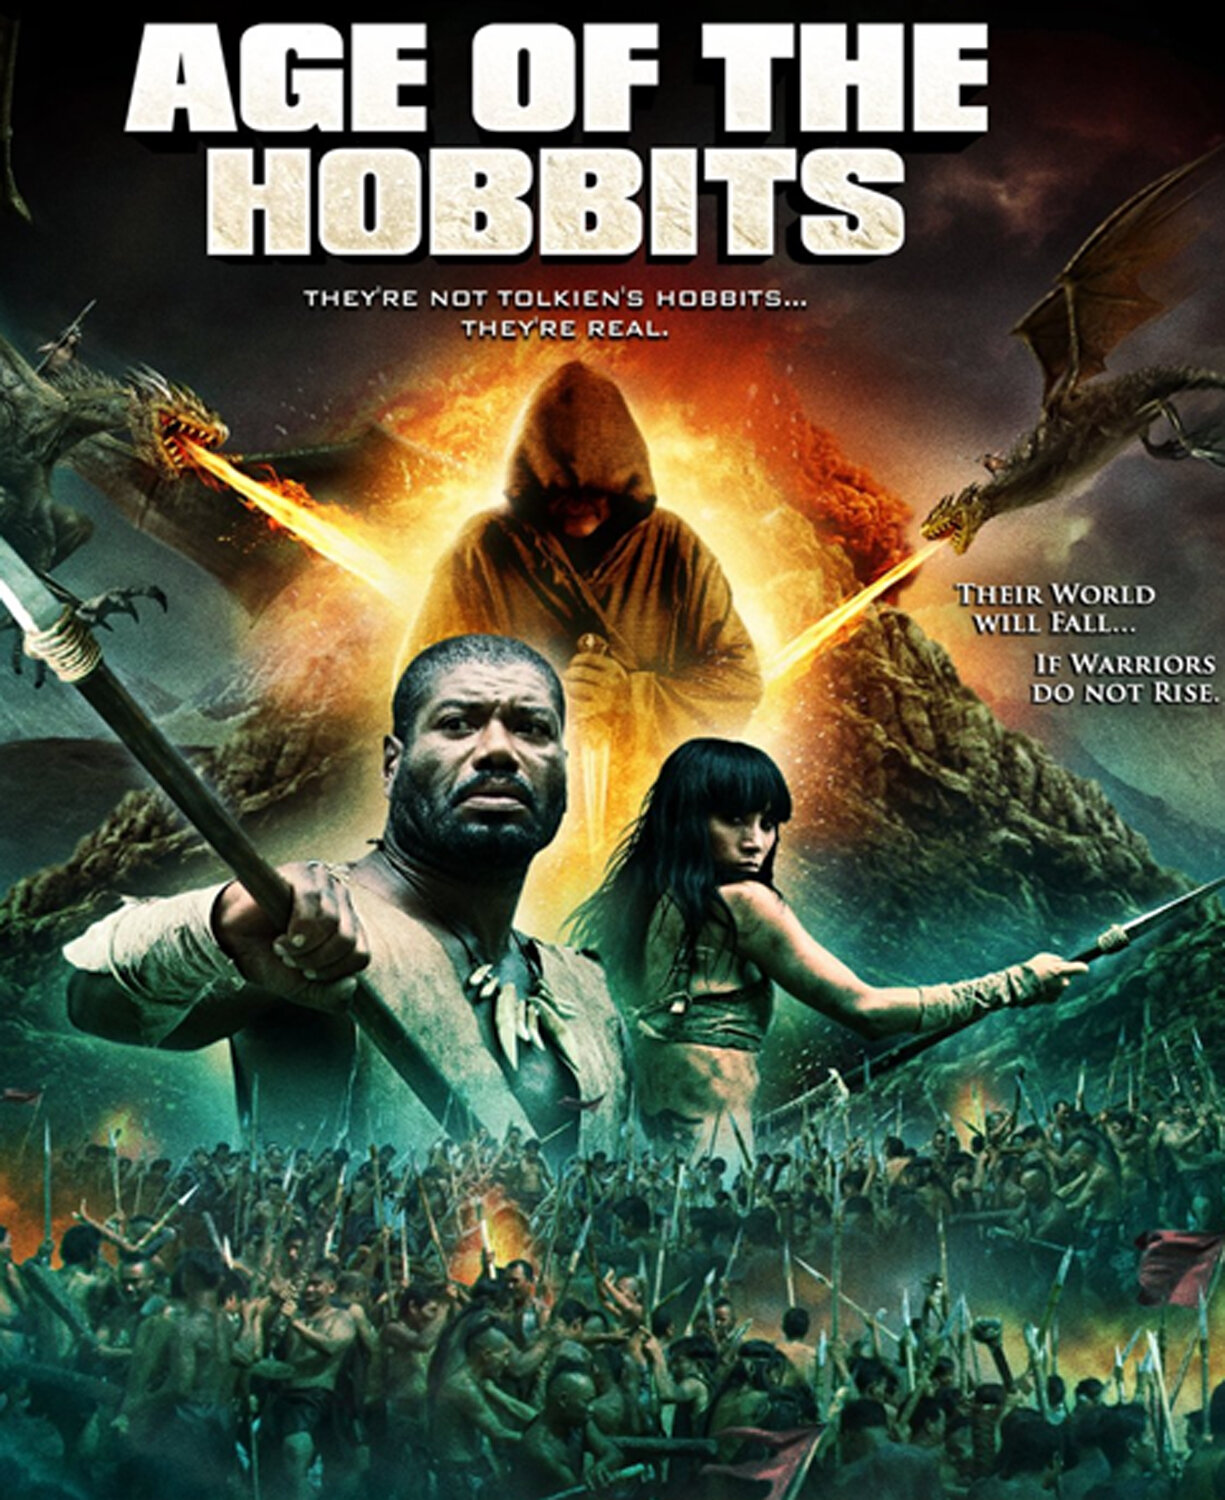 Age-of-the-Hobbits-2012-poster.jpg